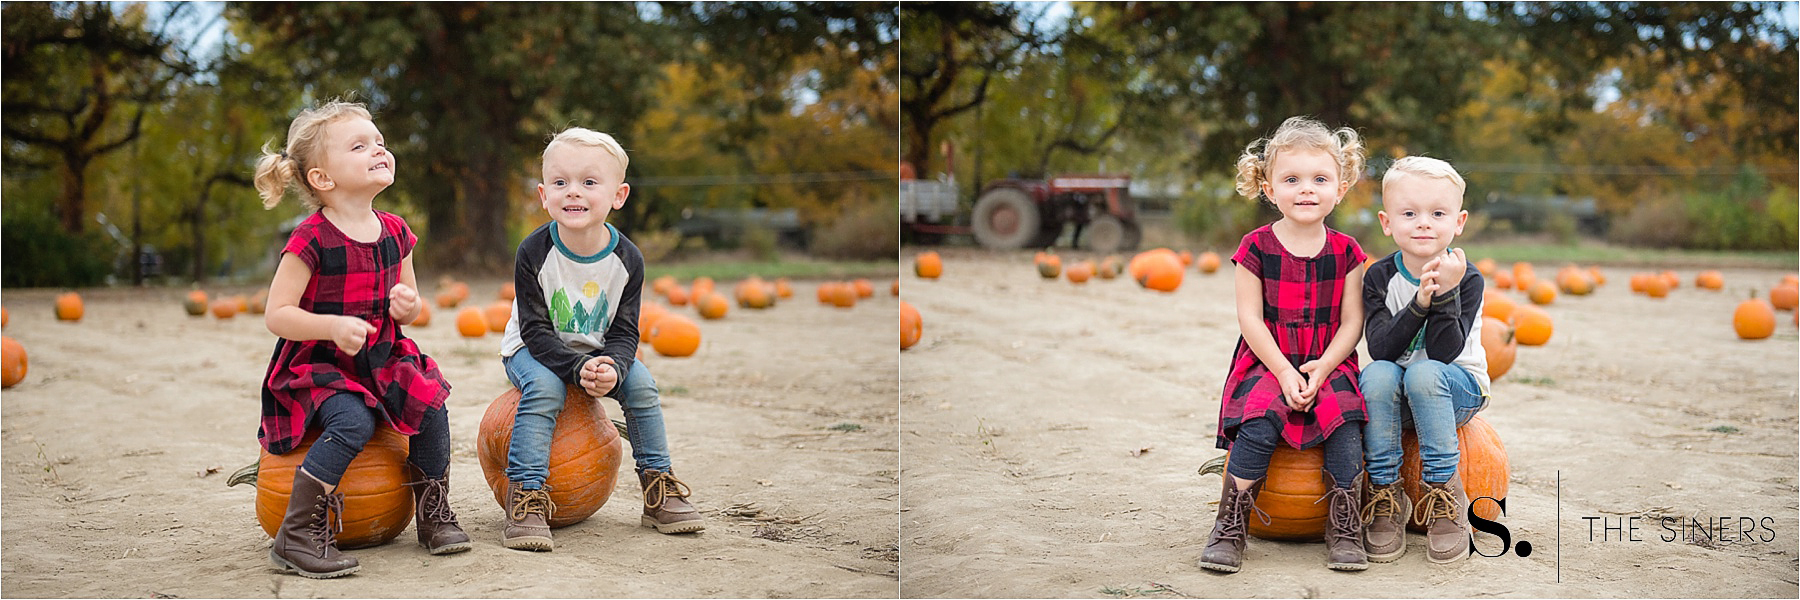 The Siners Pumpkin Patch 4